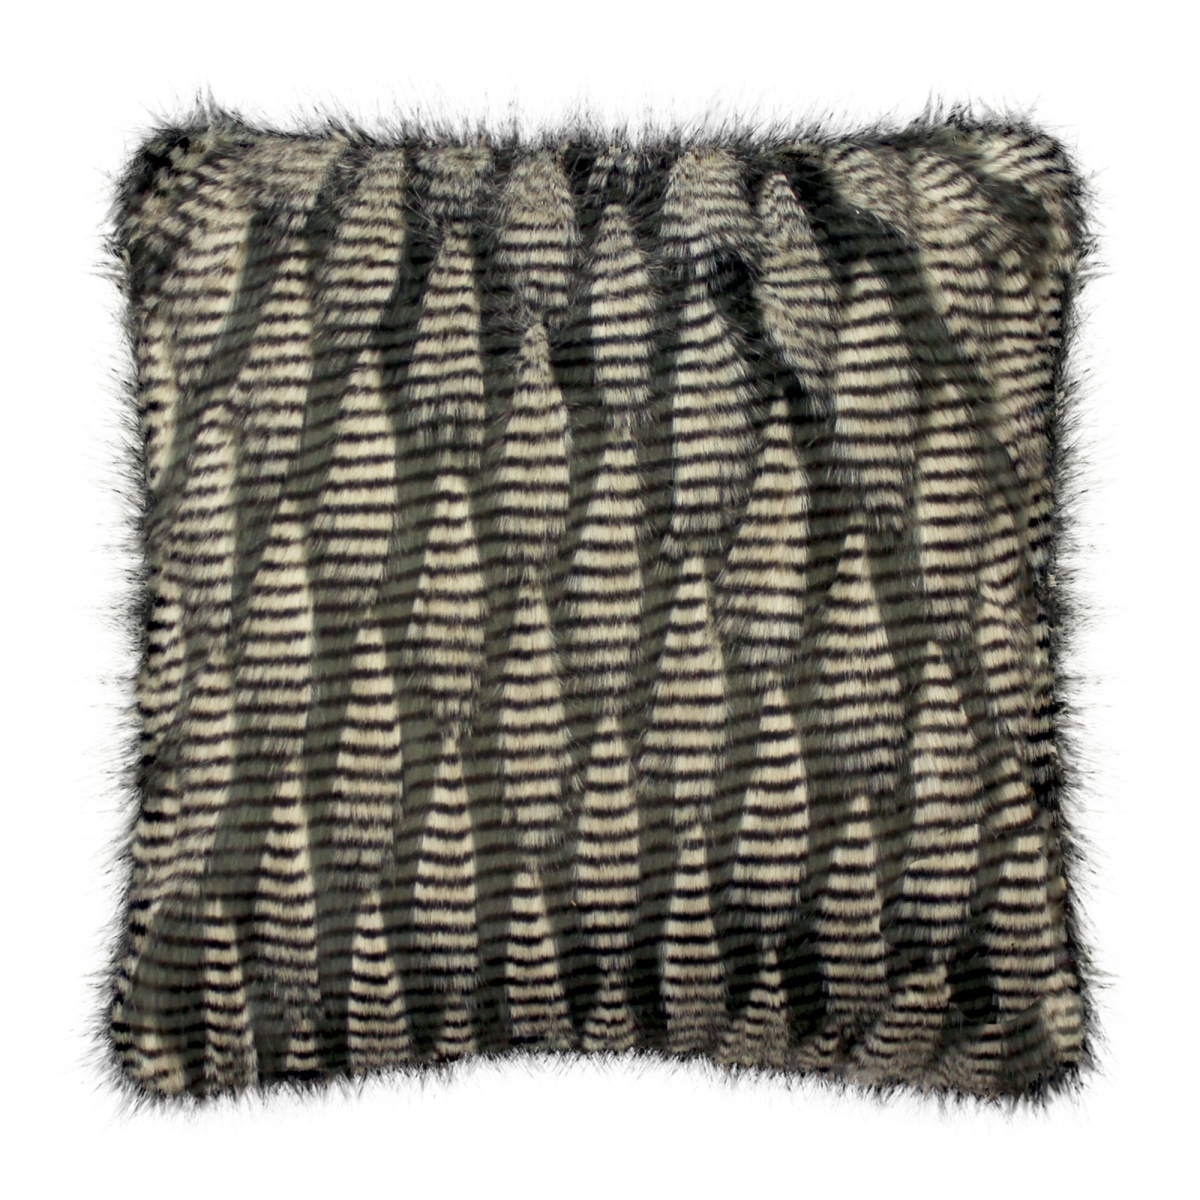 18 X 18 In. Jacquard Faux Fur Throw Pillow - 100 Percent Polyester